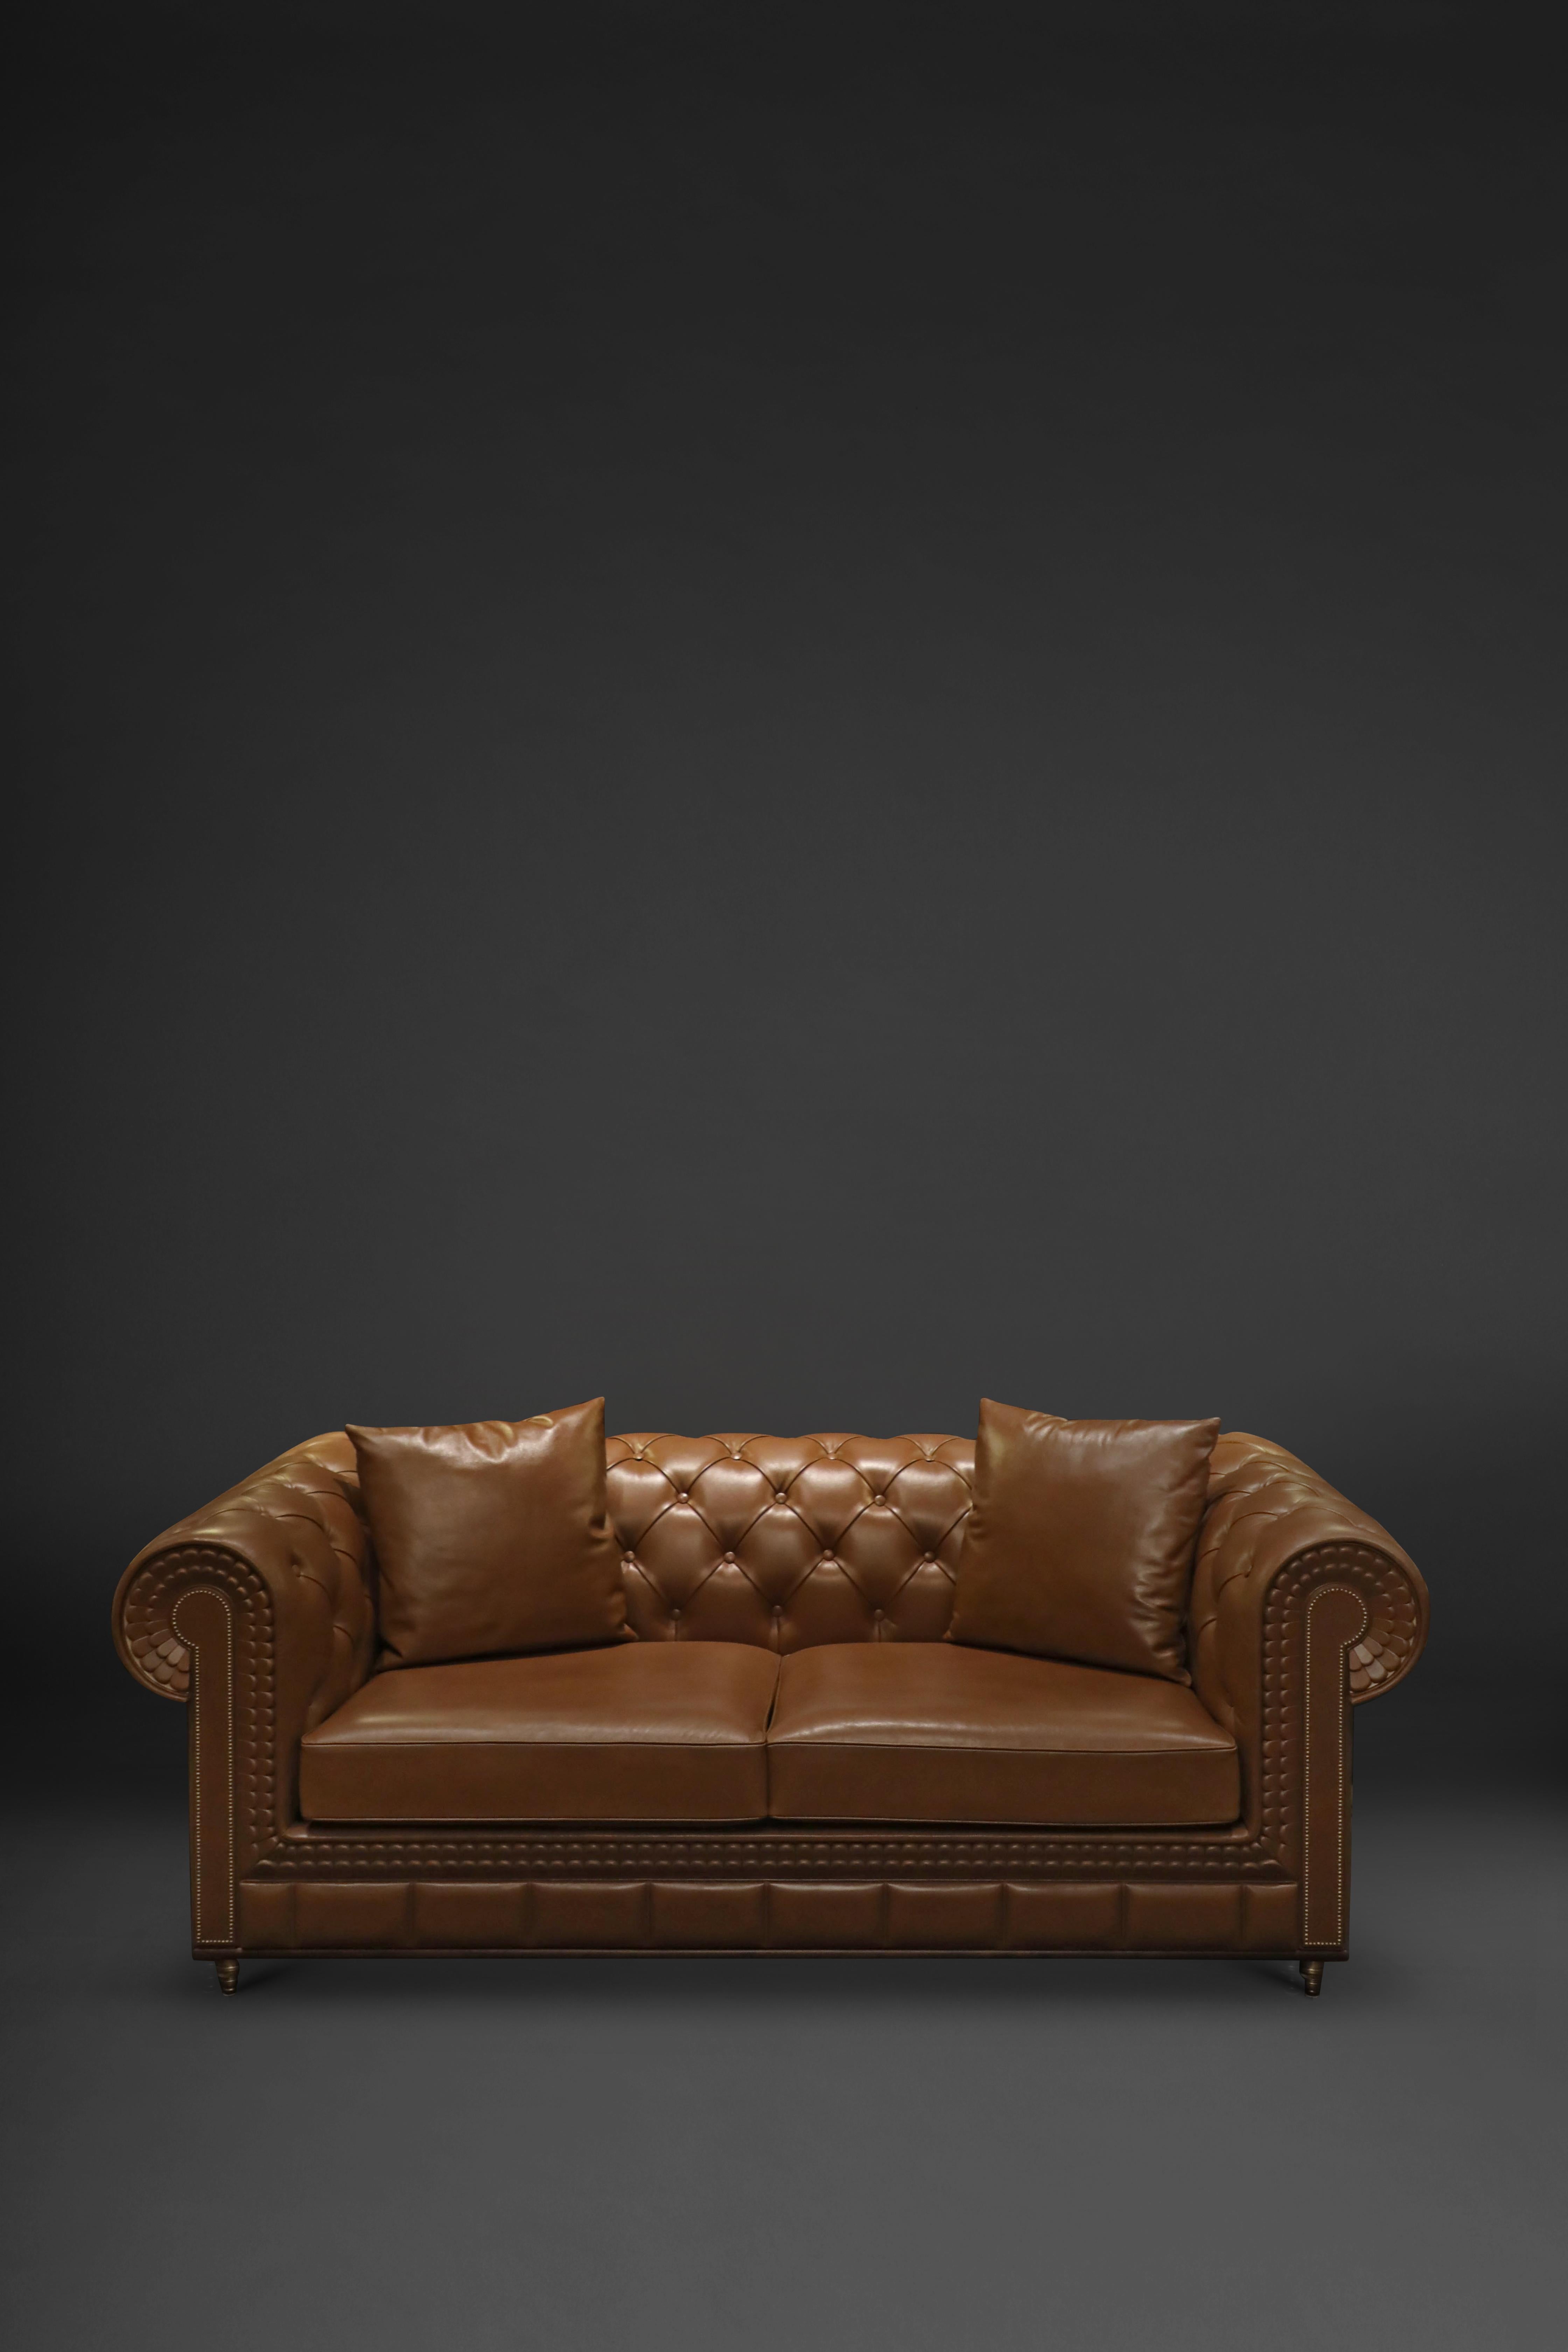 Leather Fitz study sofa by Madheke.
Dimensions: W 189 x D 90 x H 70 cm.
Materials: Leather, wood, metal.

Chesterfield inspired study sofa with layered leather front and arm detailing.

Reflecting the finest in craftsmanship, innovation and